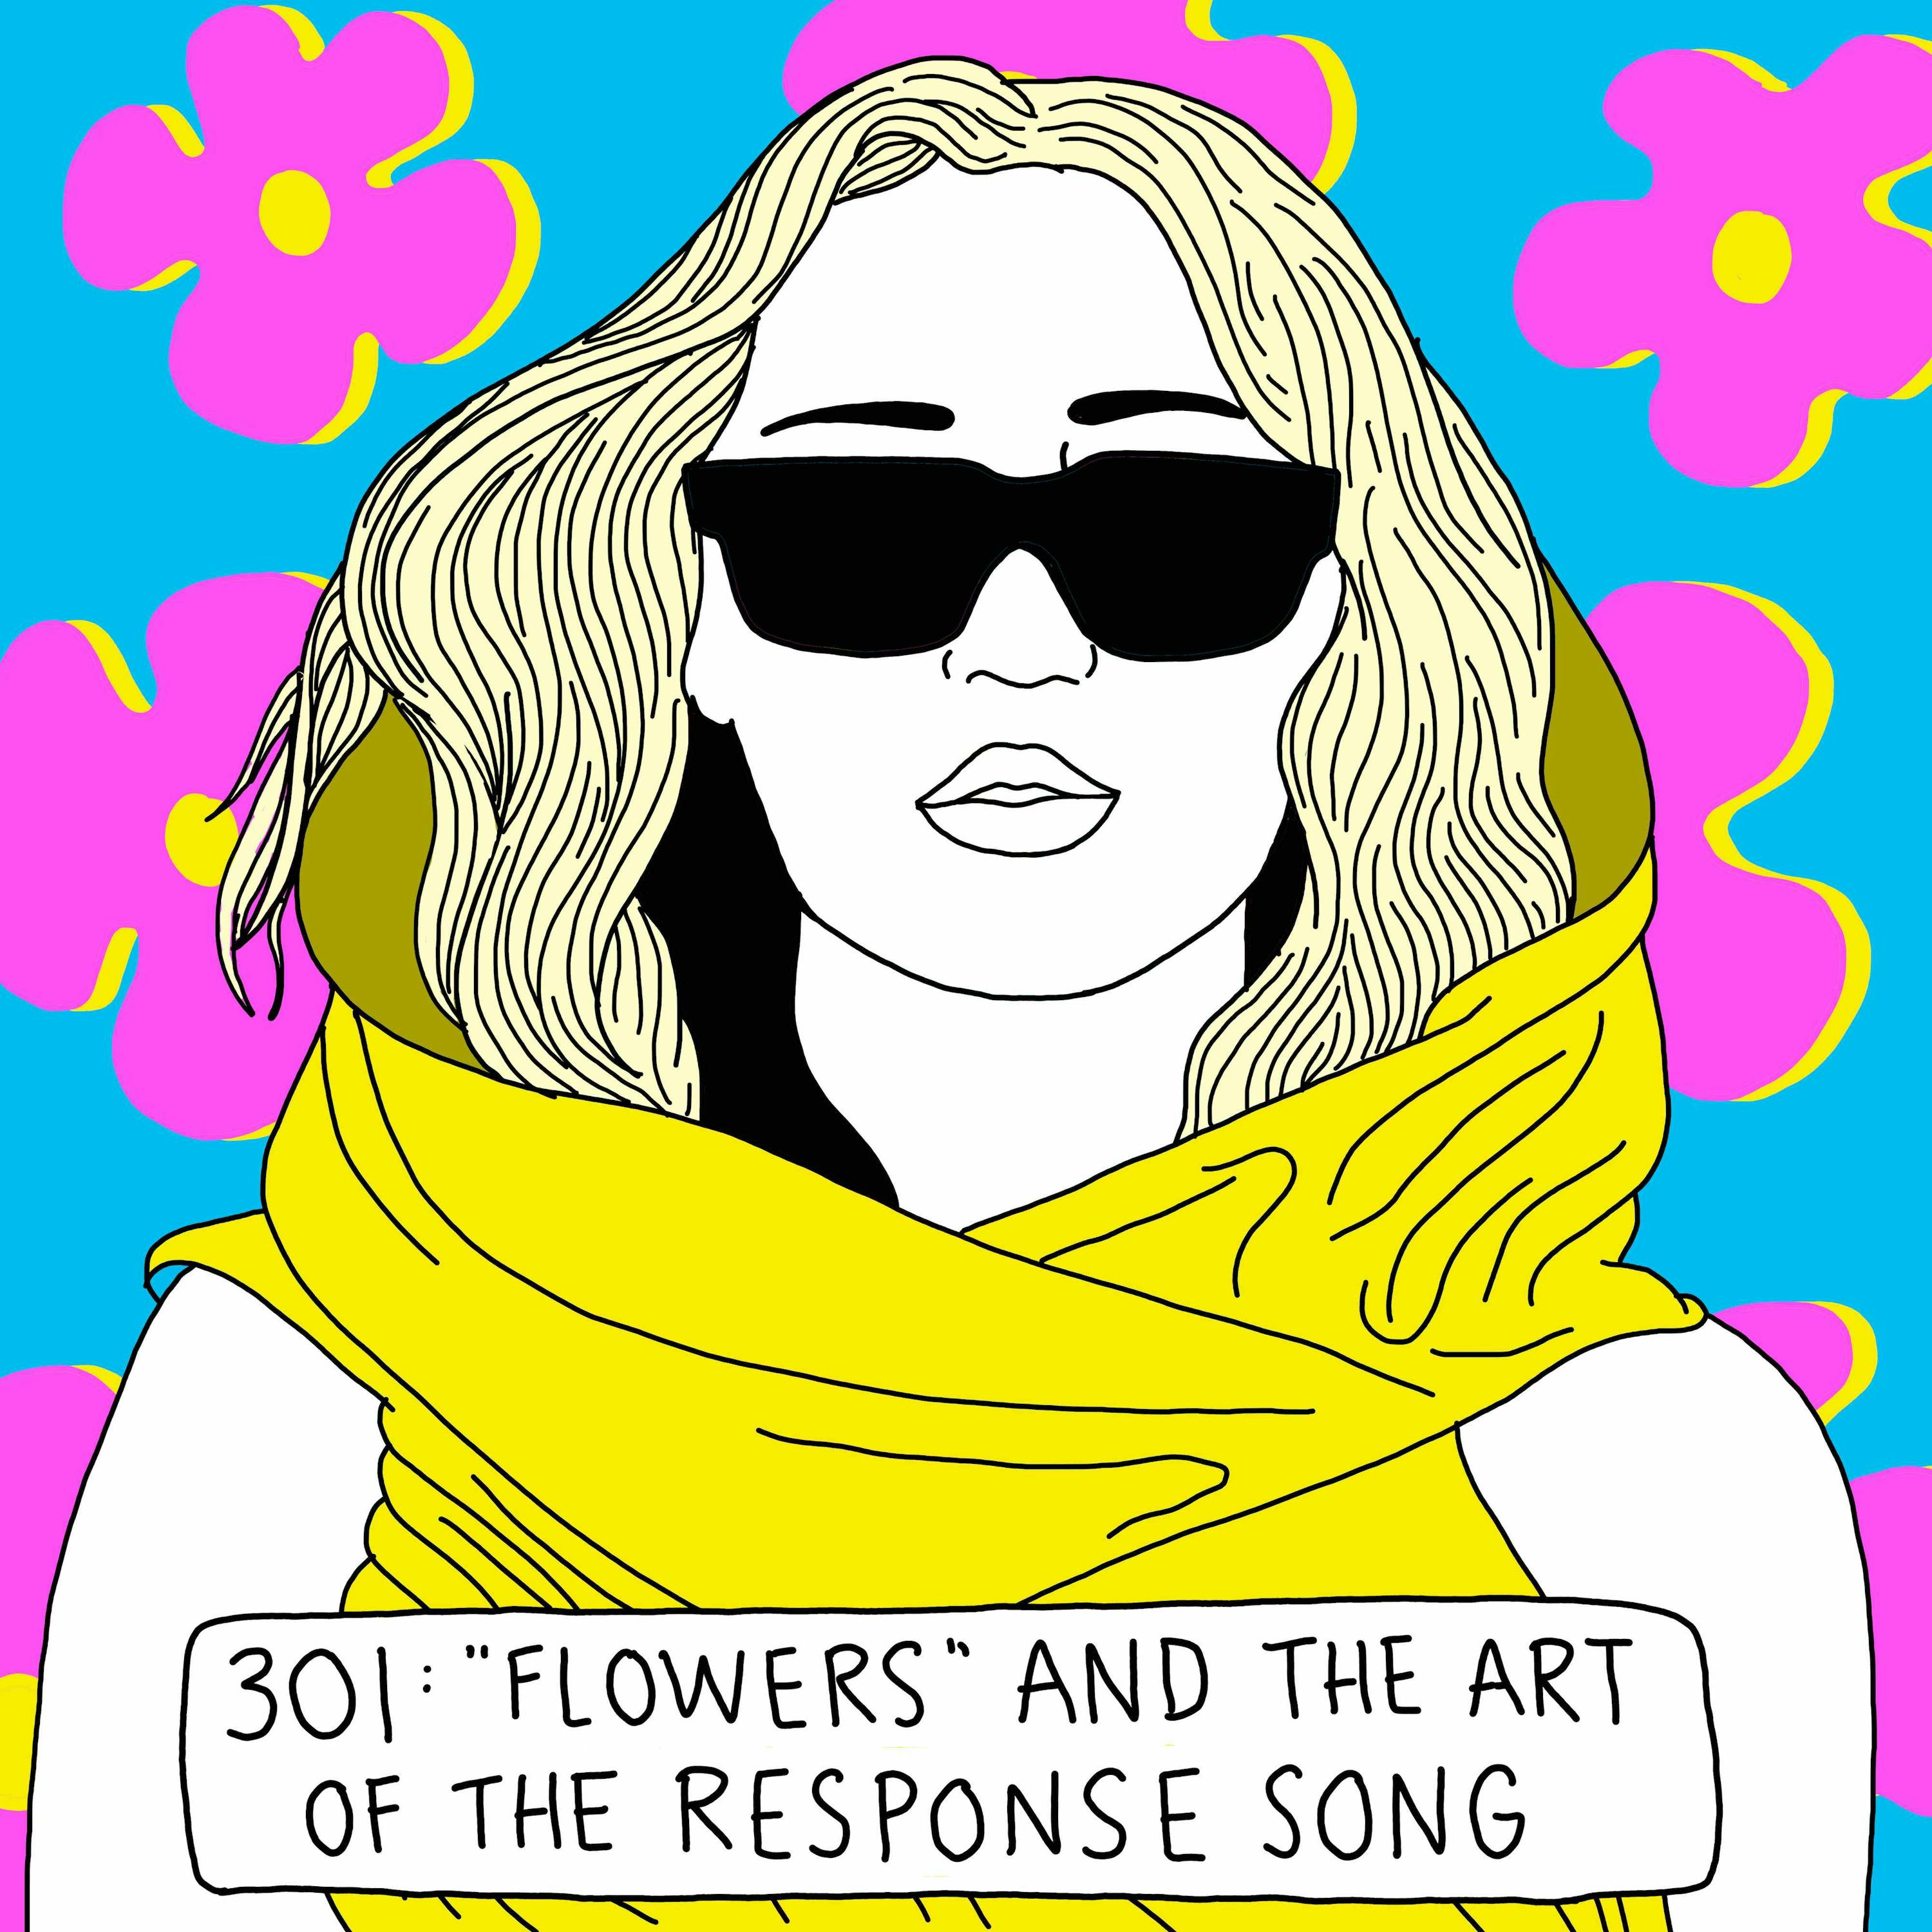 “Flowers” and the art of the response song